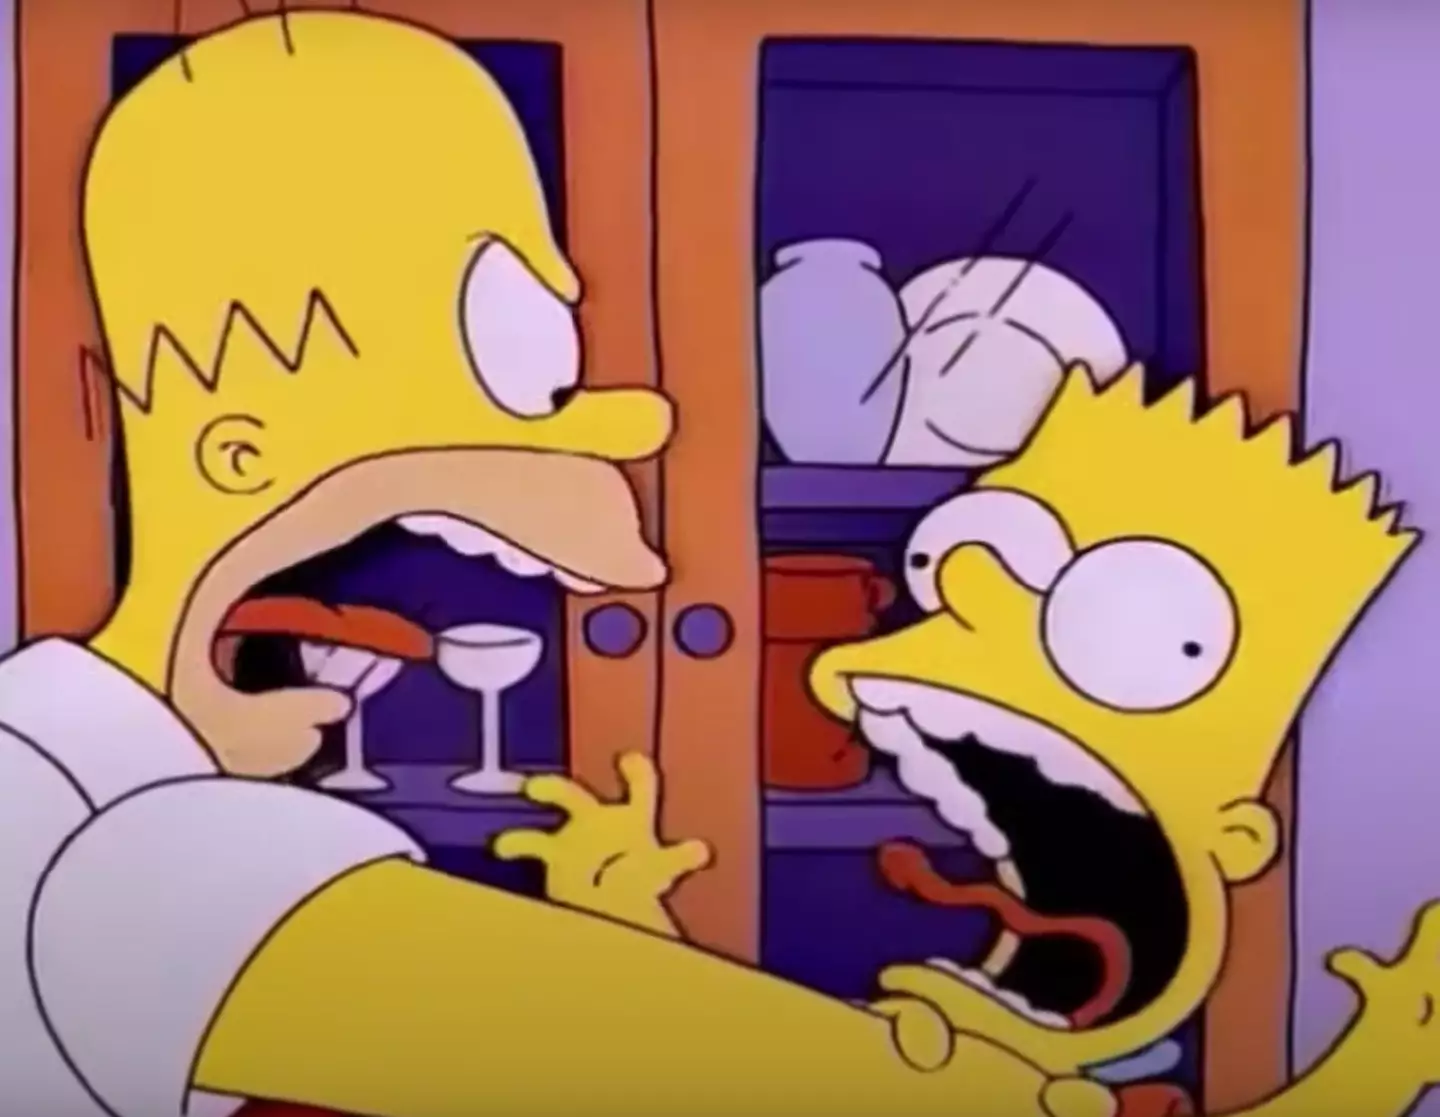 Homer strangling bart is one of the show's most recognisable running gags.